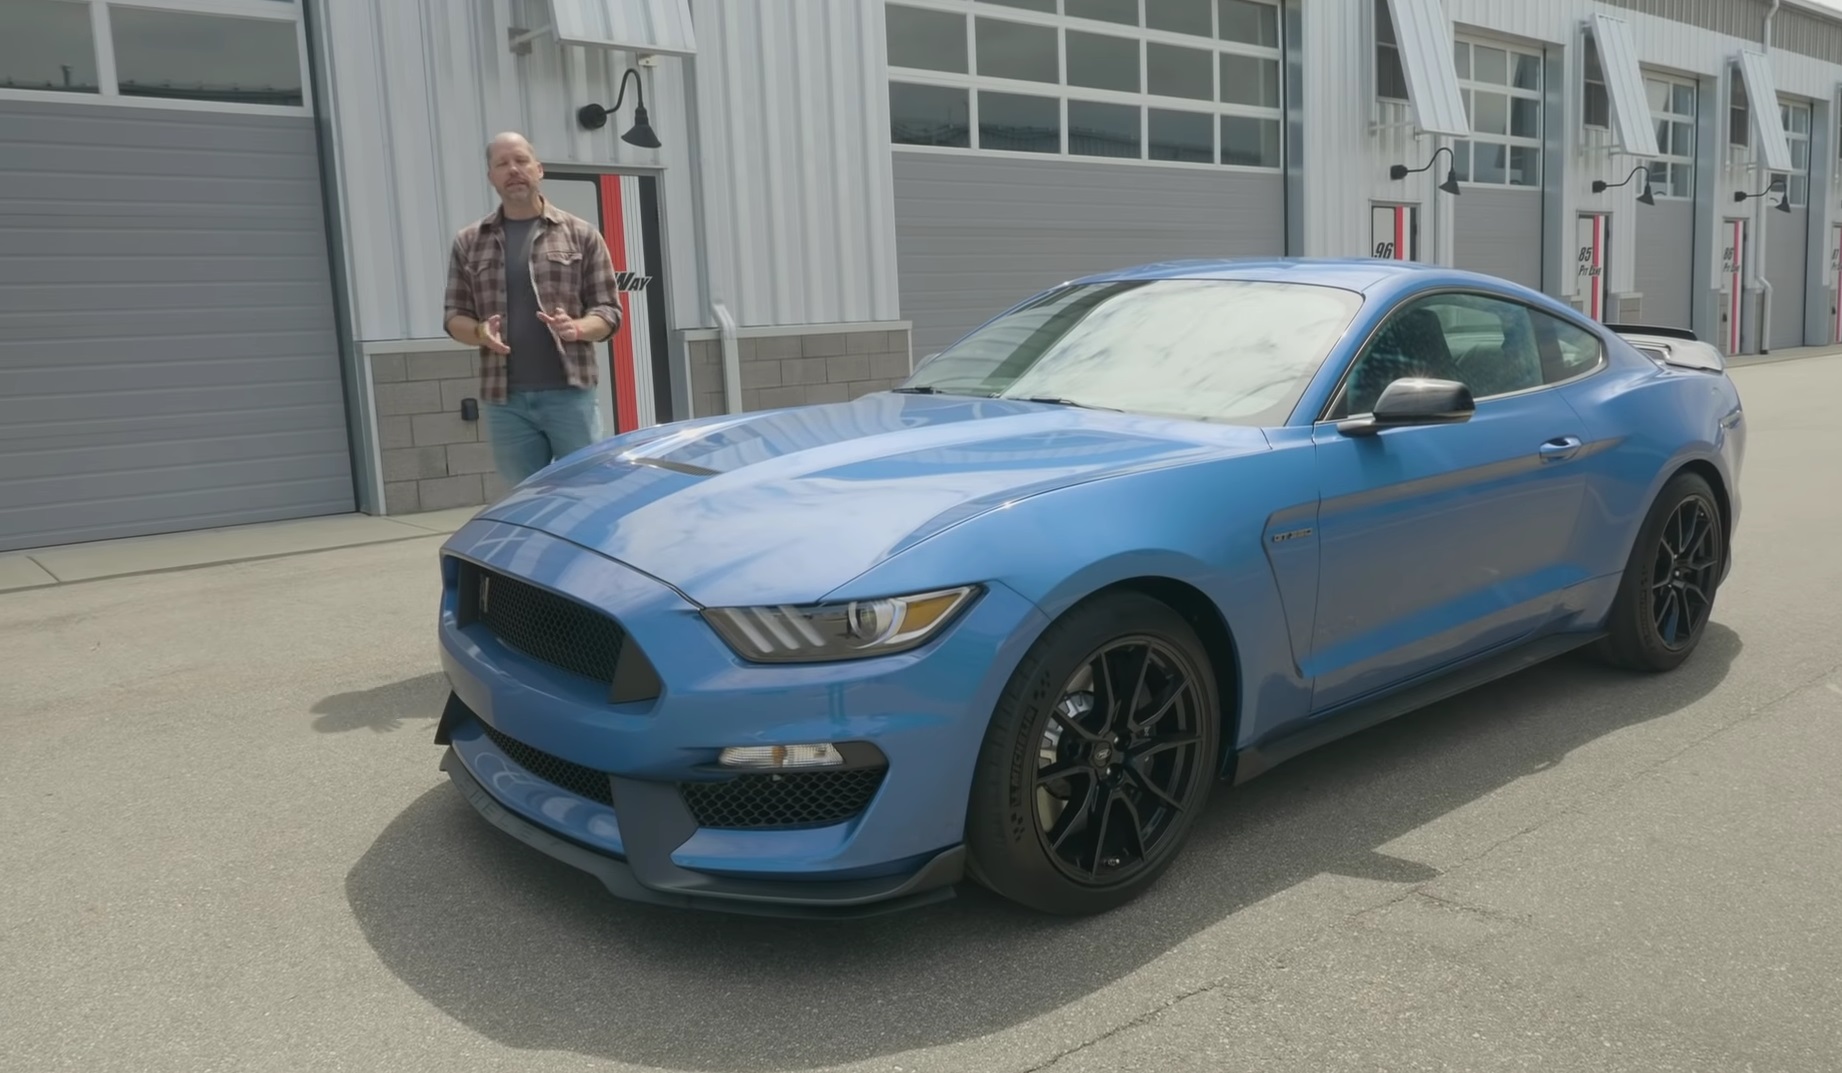 Video: 2019 Ford Mustang Shelby GT350 Test Drive & Review